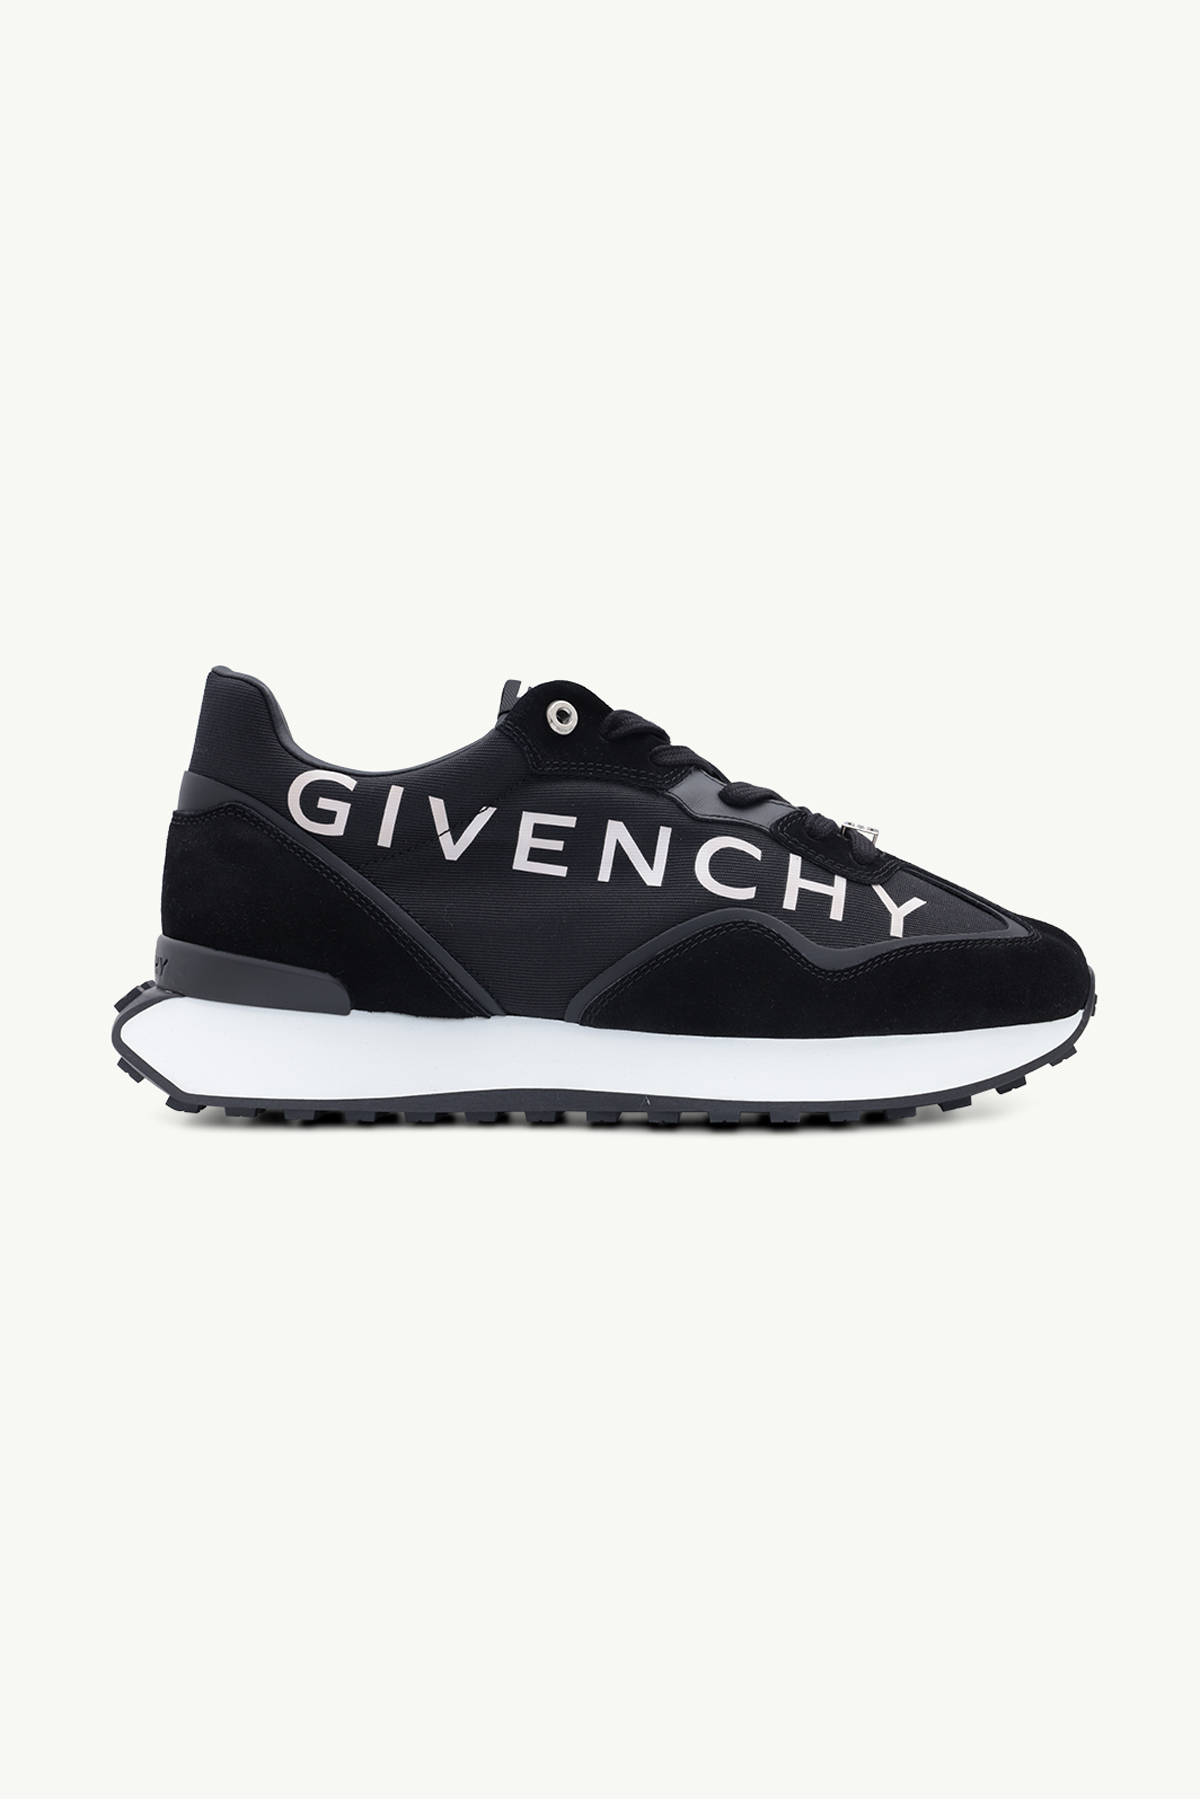 GIVENCHY Men GIV Runner Sneakers in Black/White Suede x Nylon 0